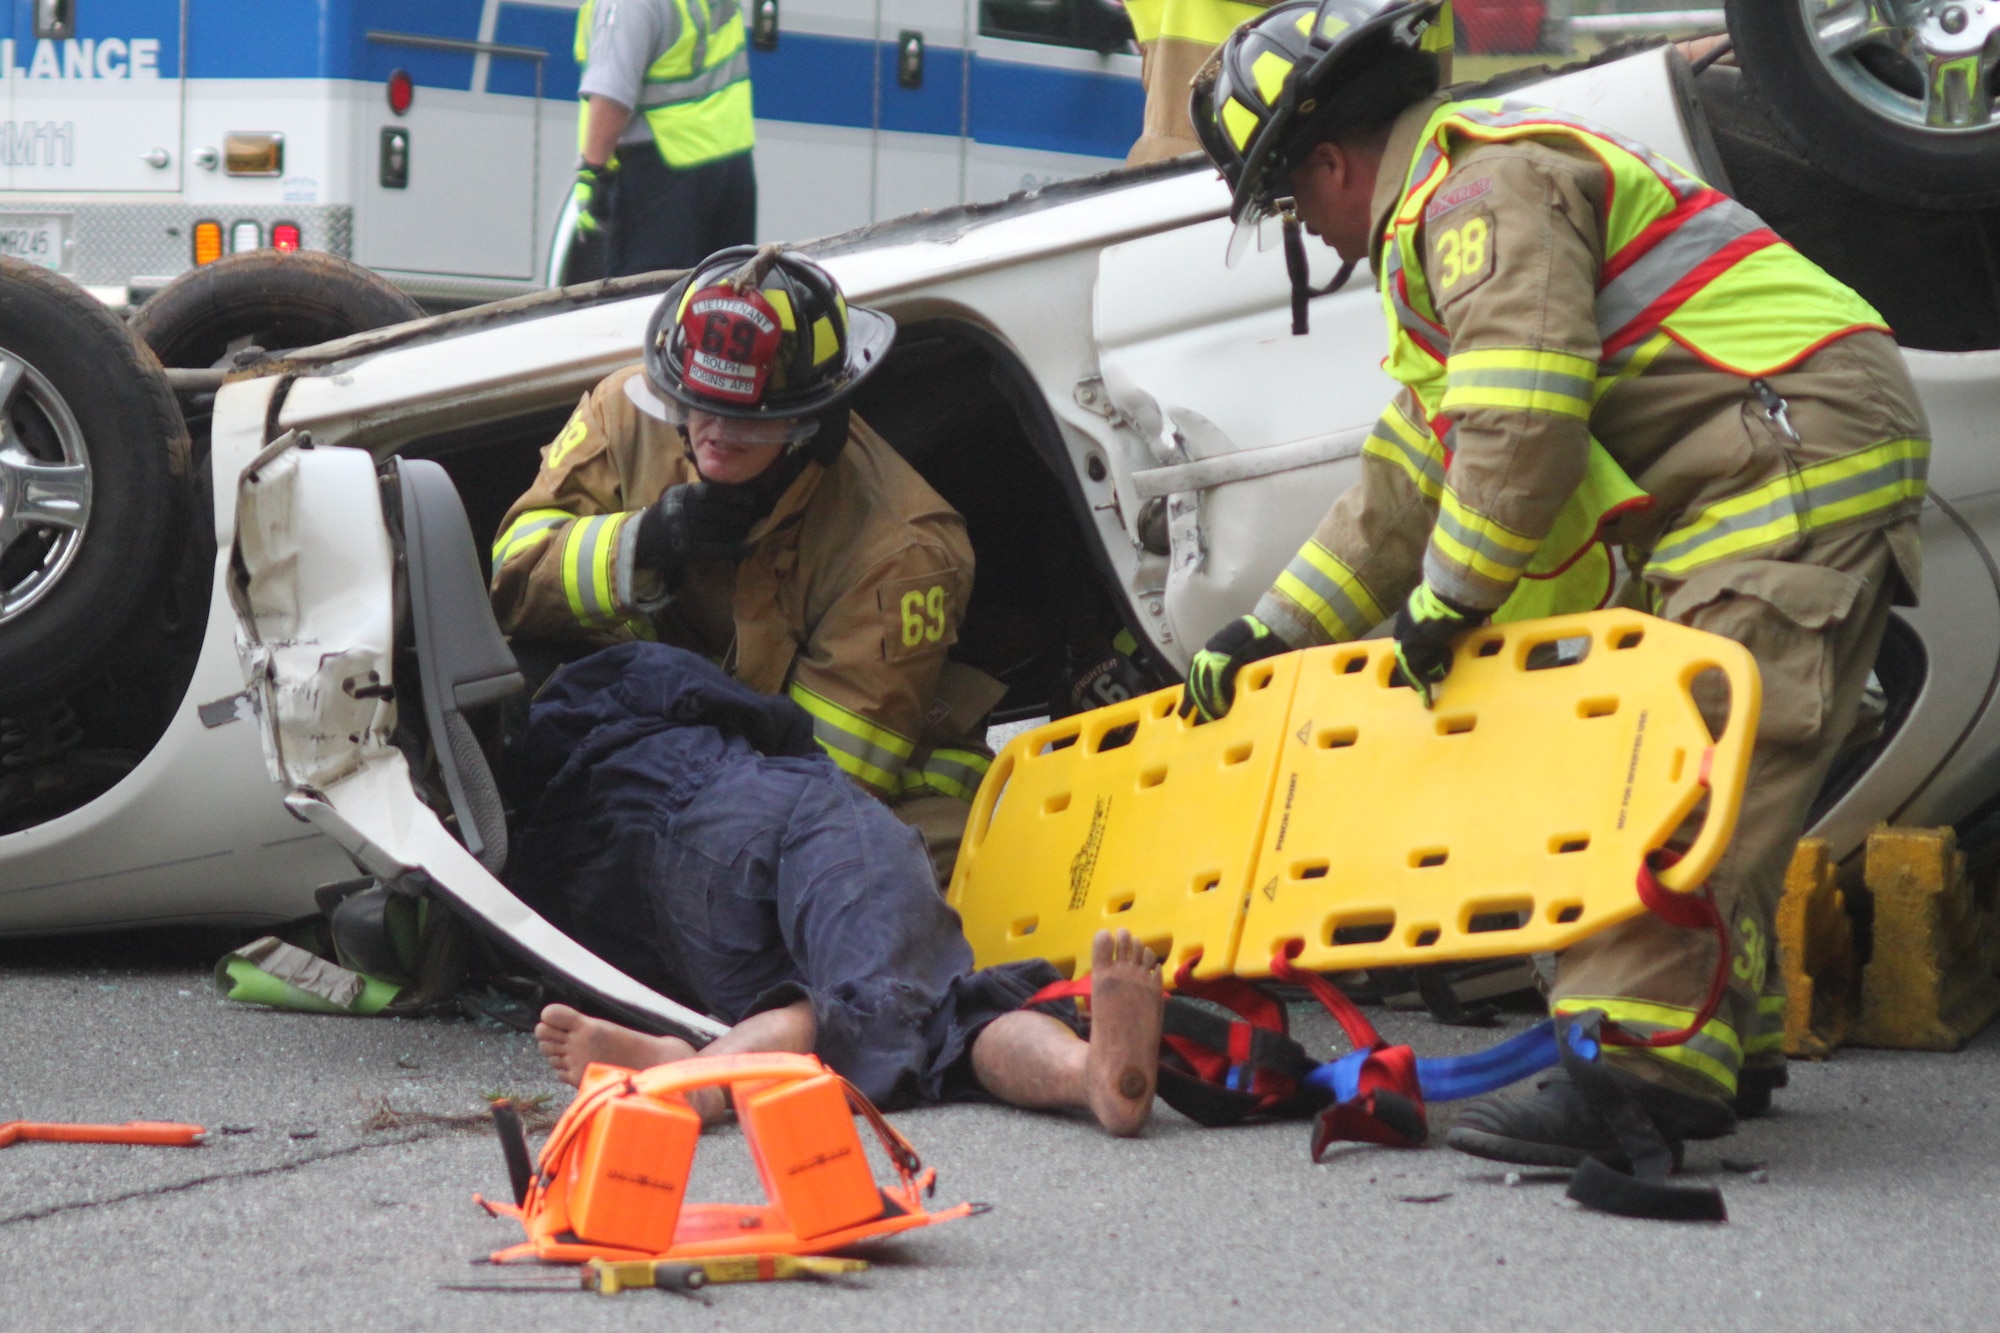 Robins Fire Emergency Services personnel participate in vehicle extrication training. The training is a requirement for all firefighters. (U.S. Air Force photo by Angela Woolen)